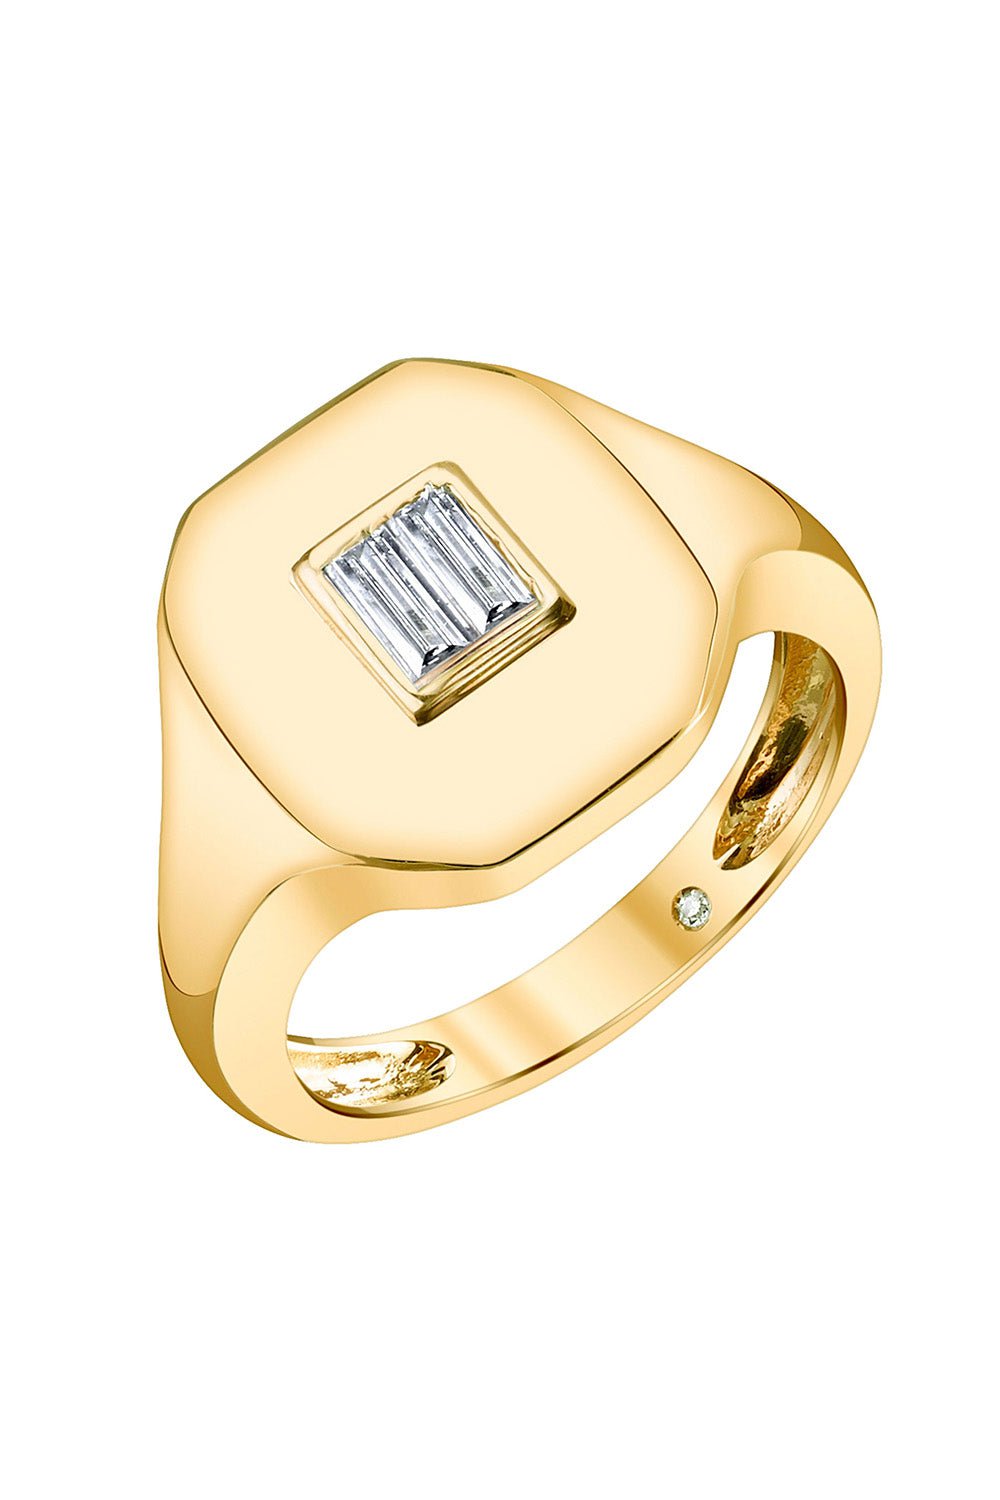 SHAY JEWELRY-Baguette Diamond Pinky Ring-YELLOW GOLD